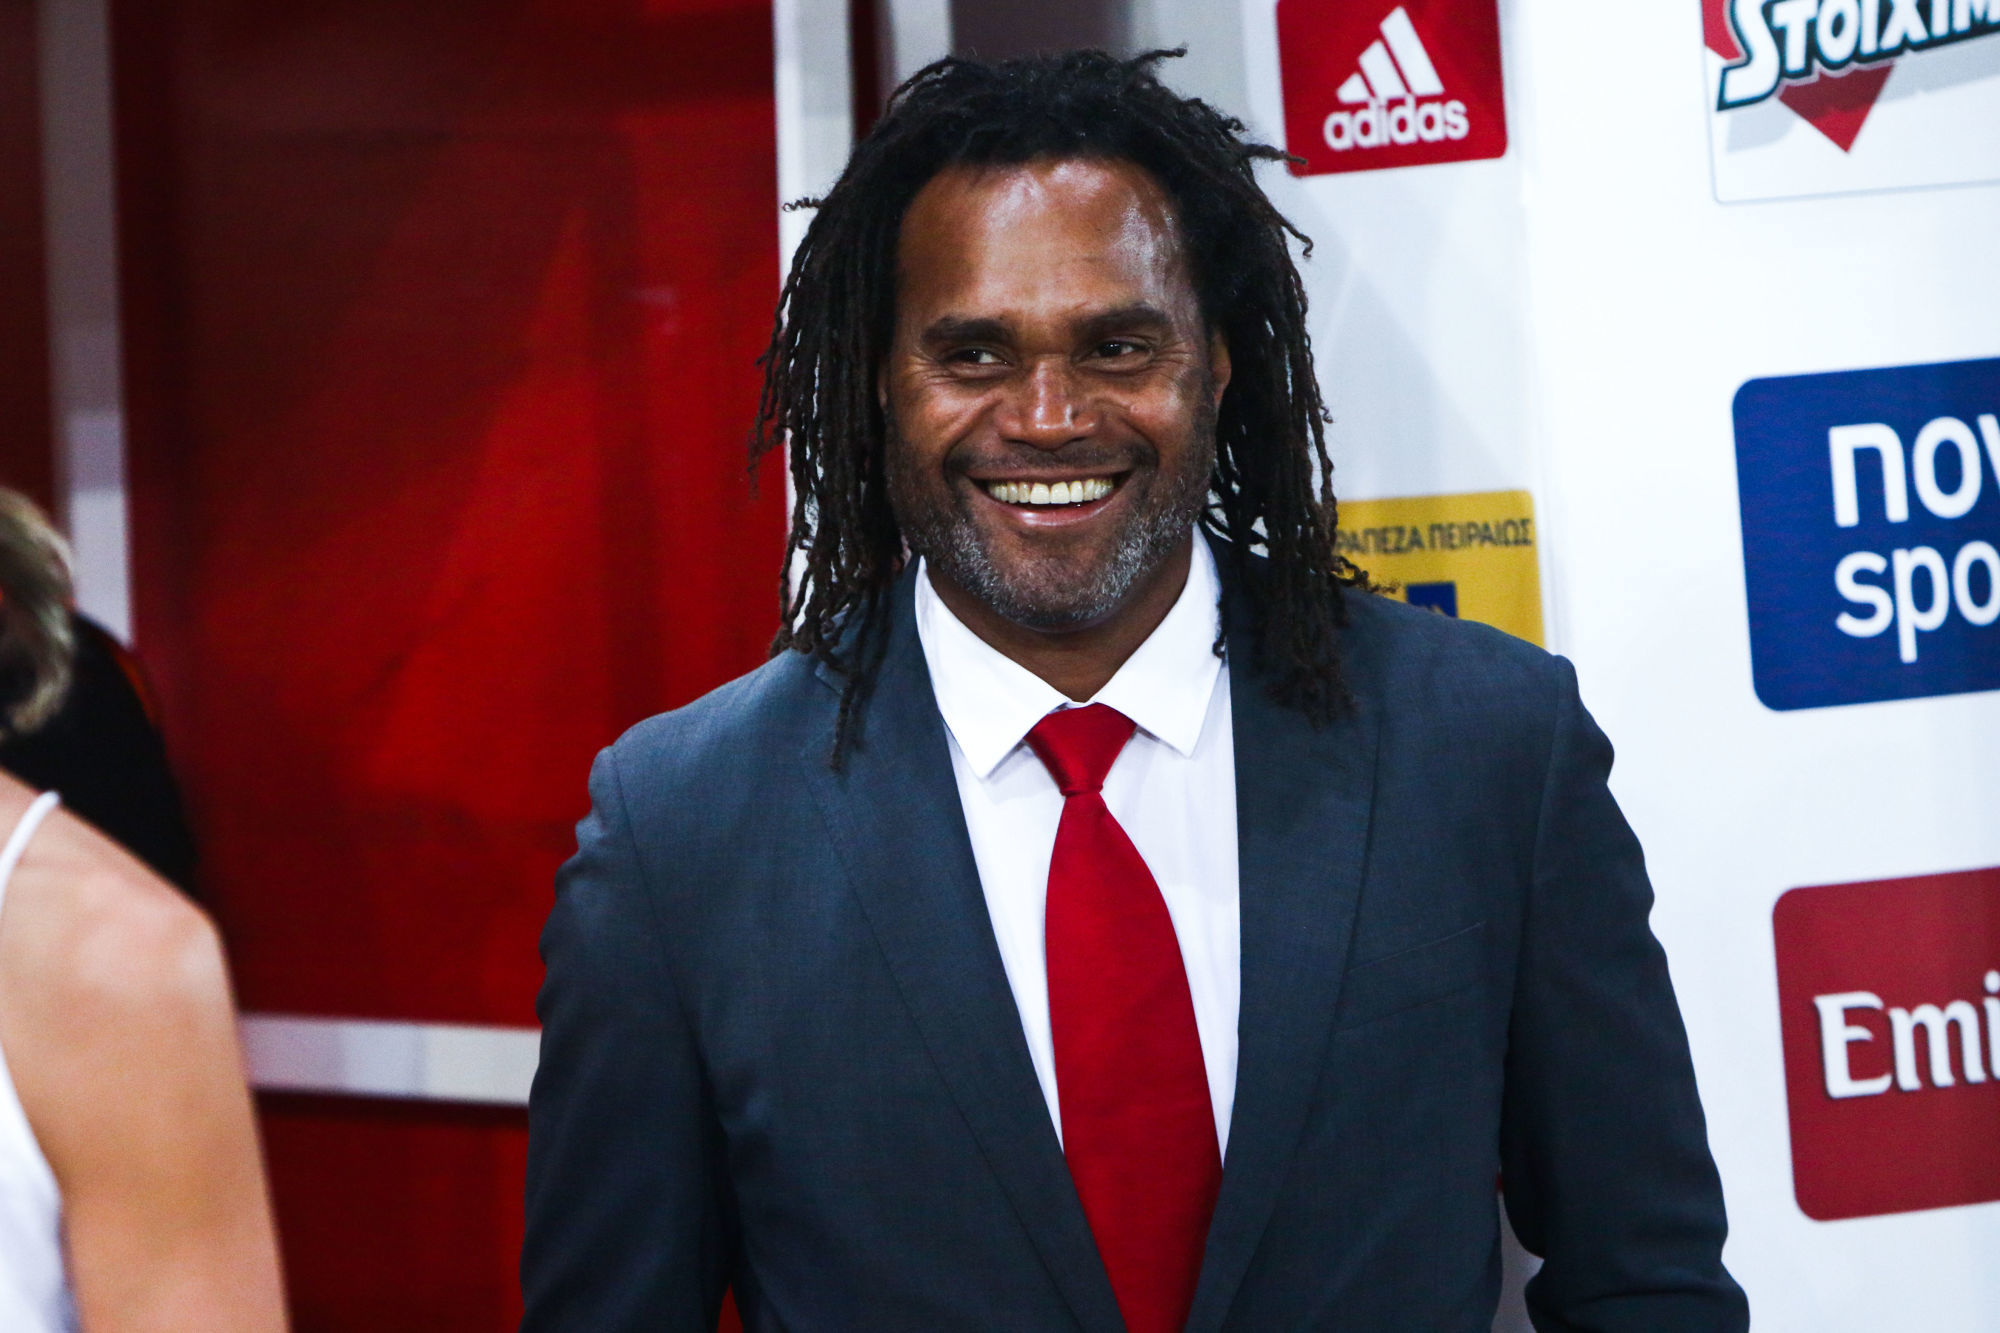 Christian Karembeu during the uefa champions league qualification match between Olympiakos and Hapoel Beer Sheva at Neo Faliro, Greece on July 27, 2016.